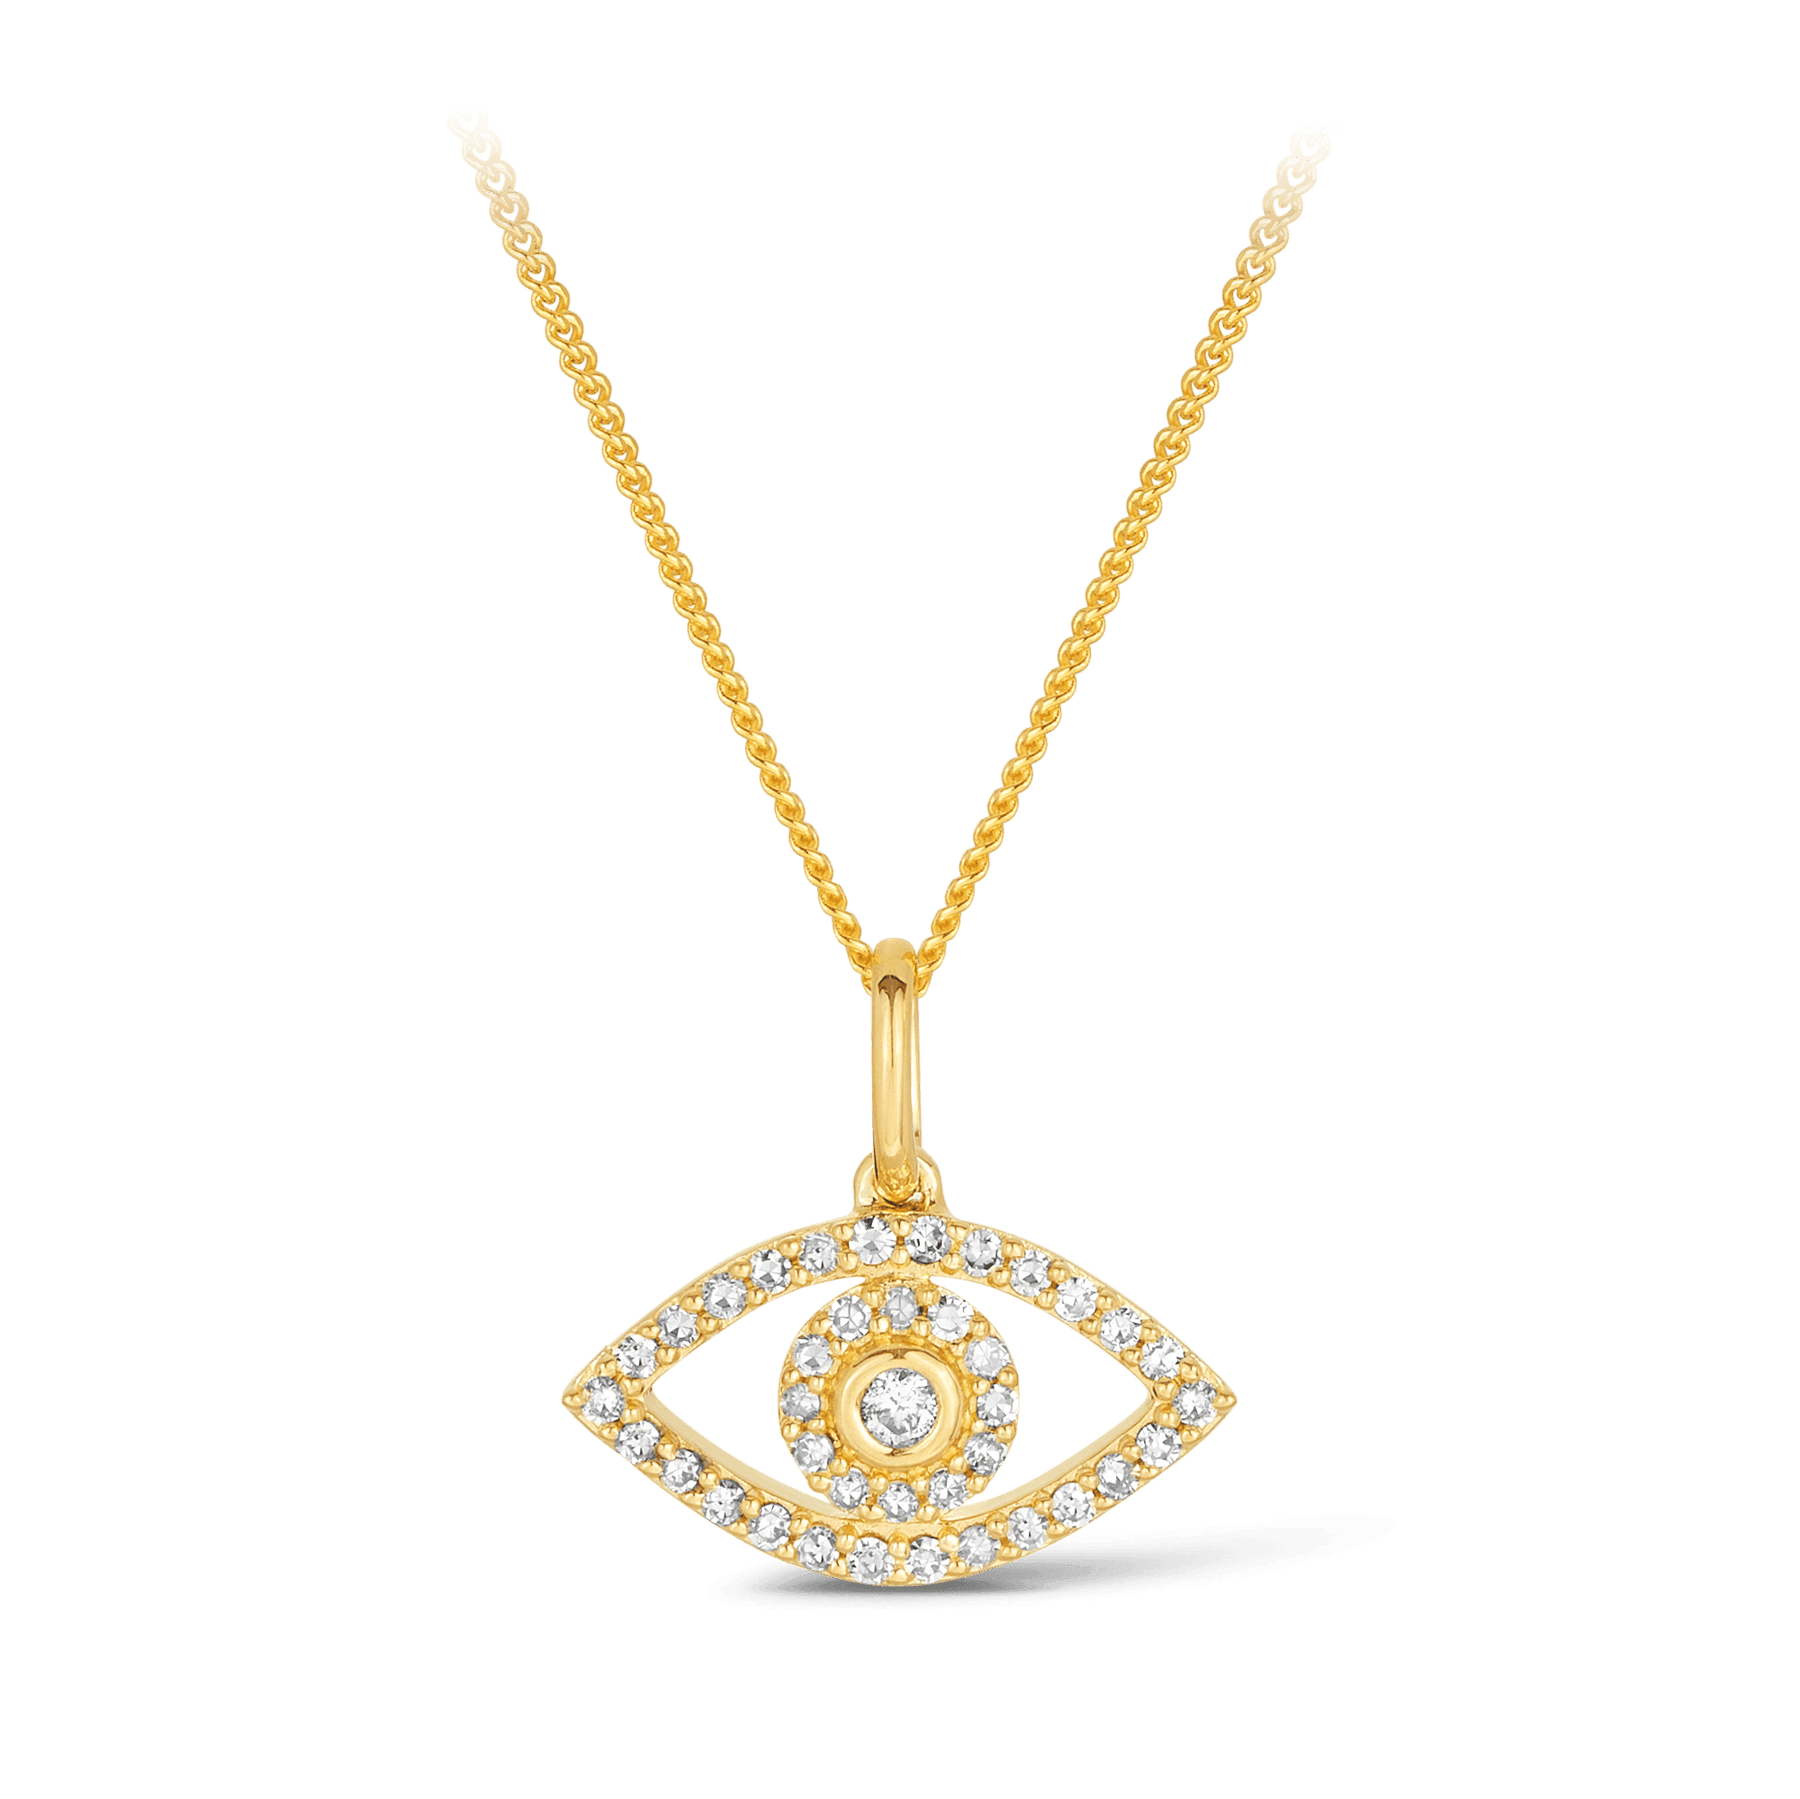 3 Evil Eye Diamond Pendant Necklace With Sapphire In 14K White Gold |  Fascinating Diamonds